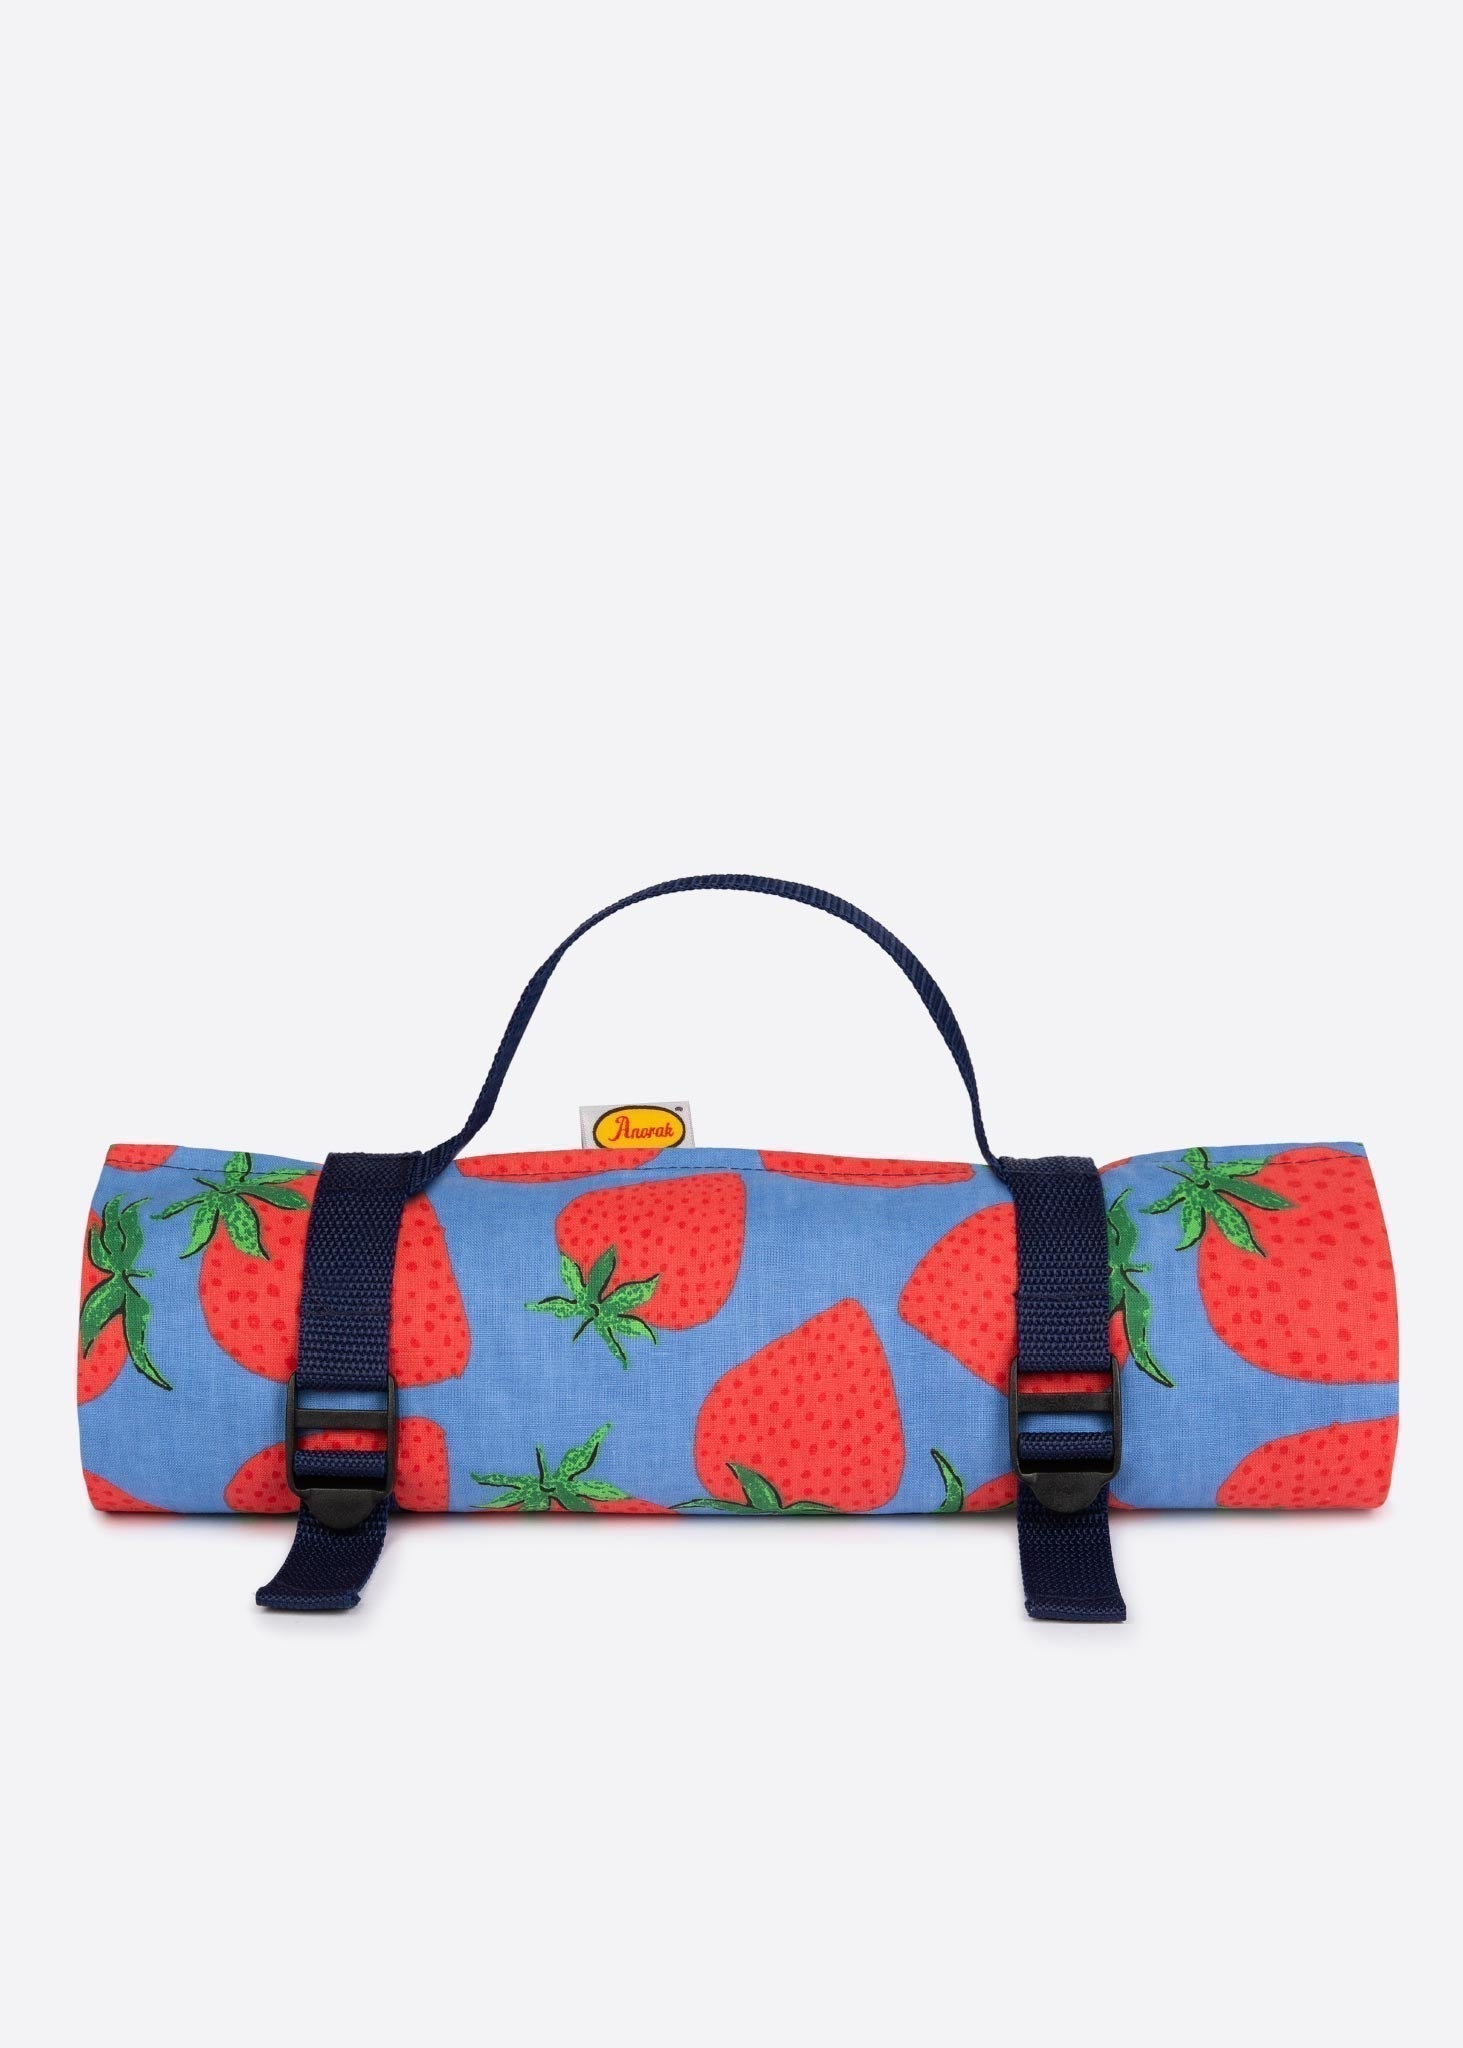 Anorak Blue and Red Strawberry Printed Picnic Blanket